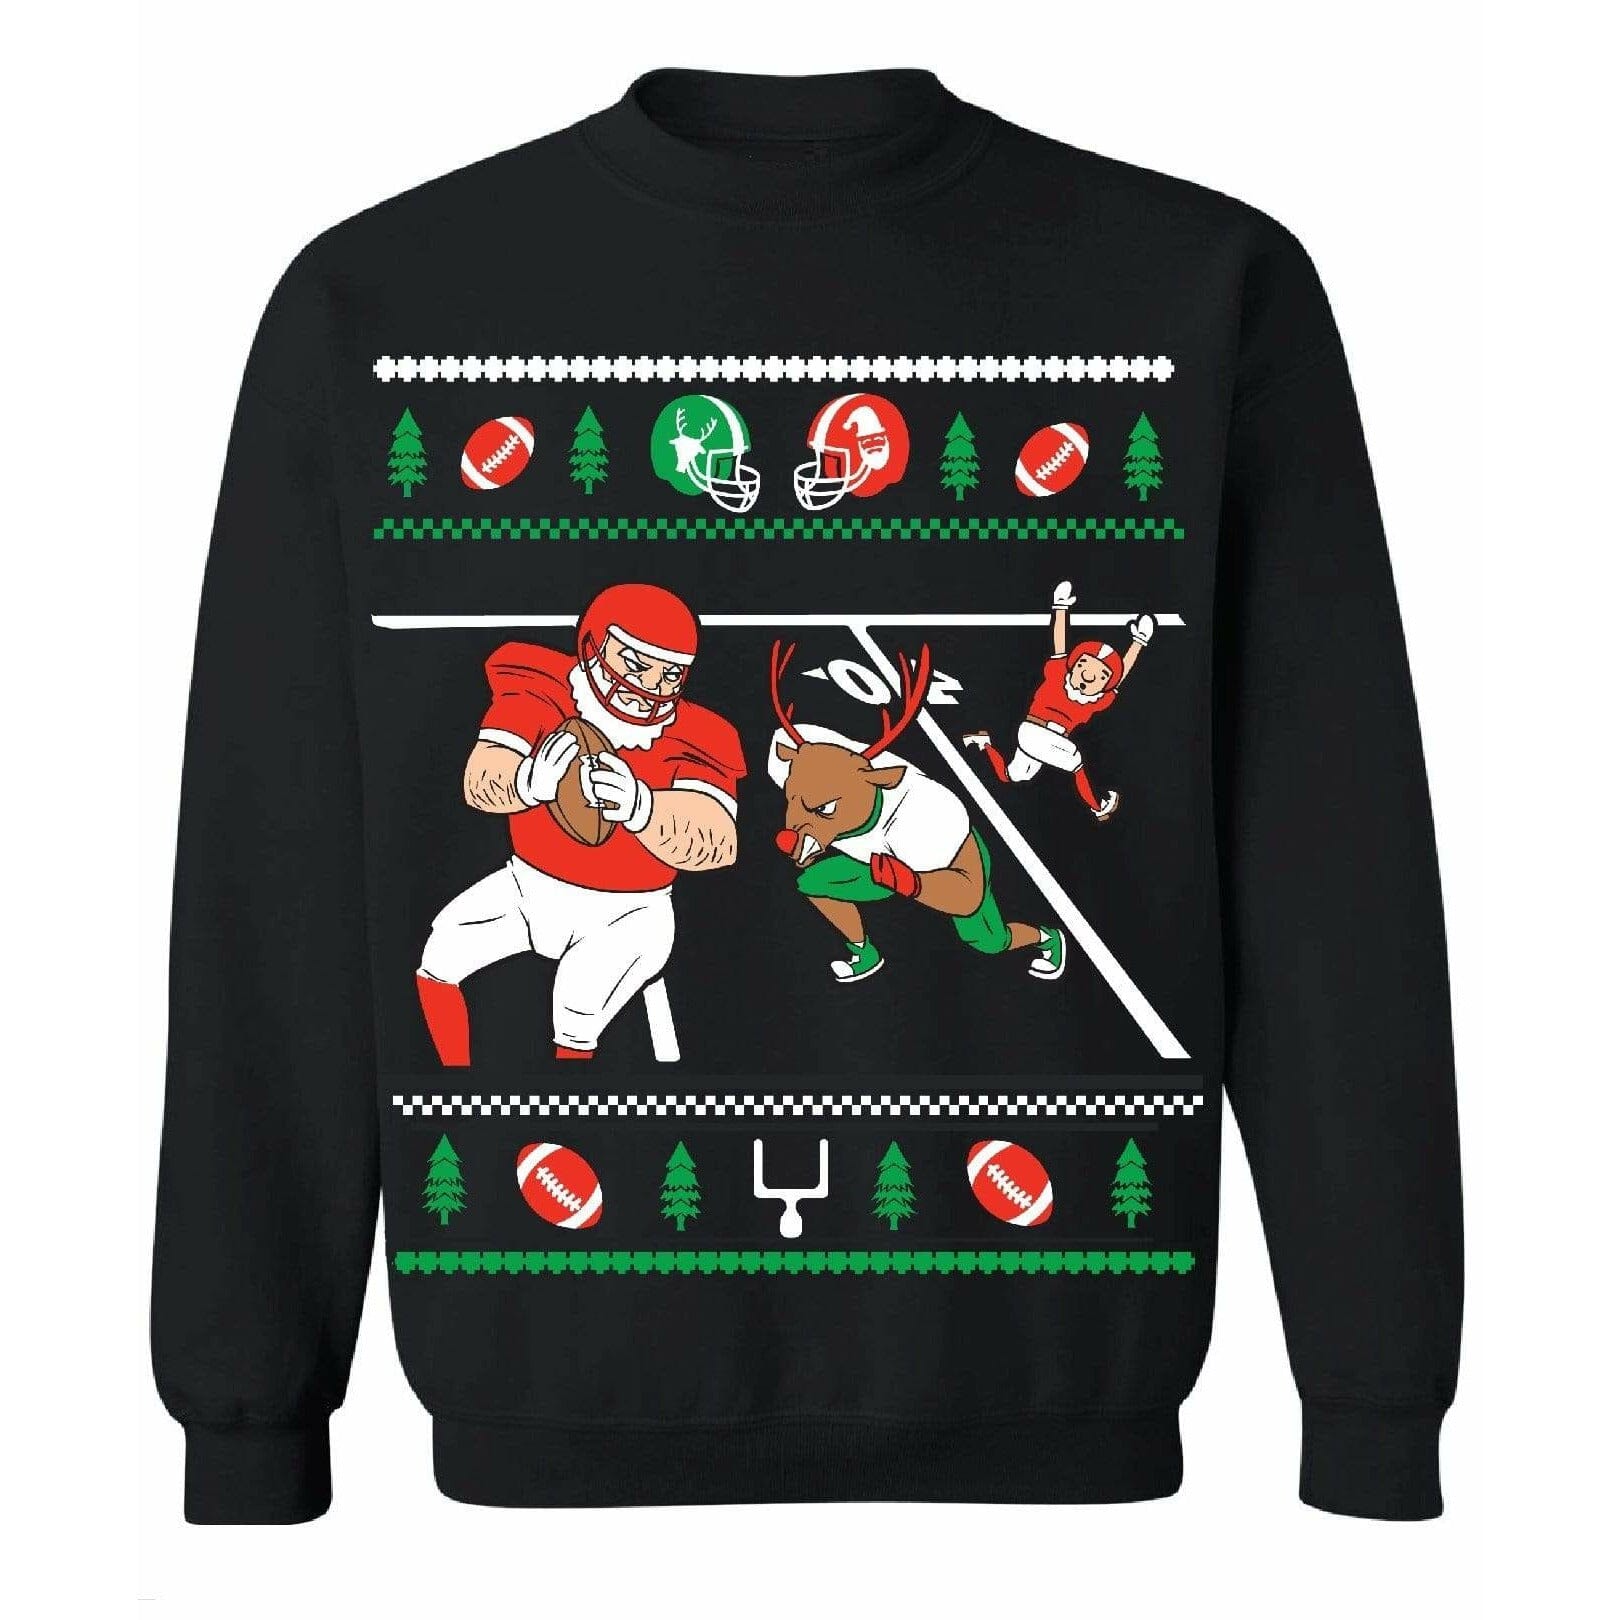 FOOTBALL - Black "Ugly" Christmas Sweaters Snowtorious Small Adult 